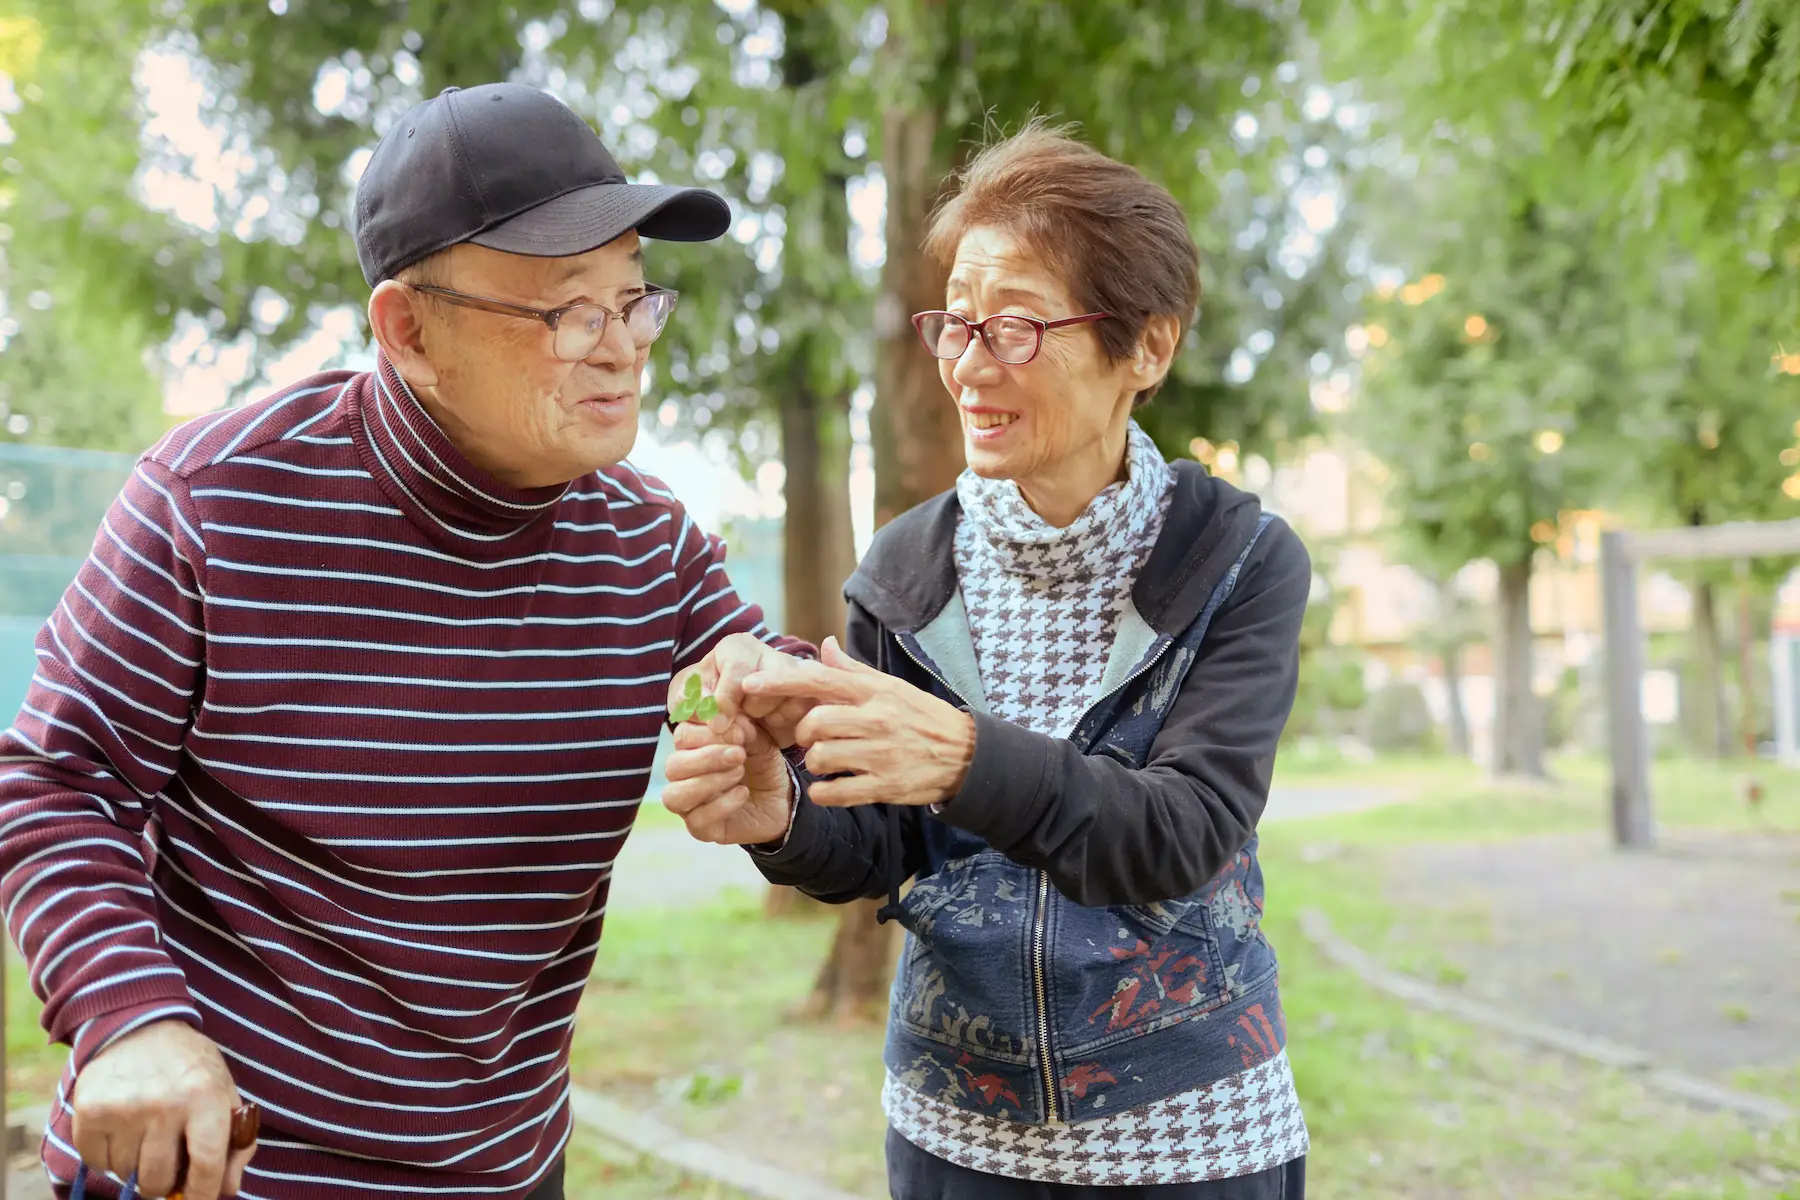 An older couple takes a walk through the park; the woman is handing the man a clover